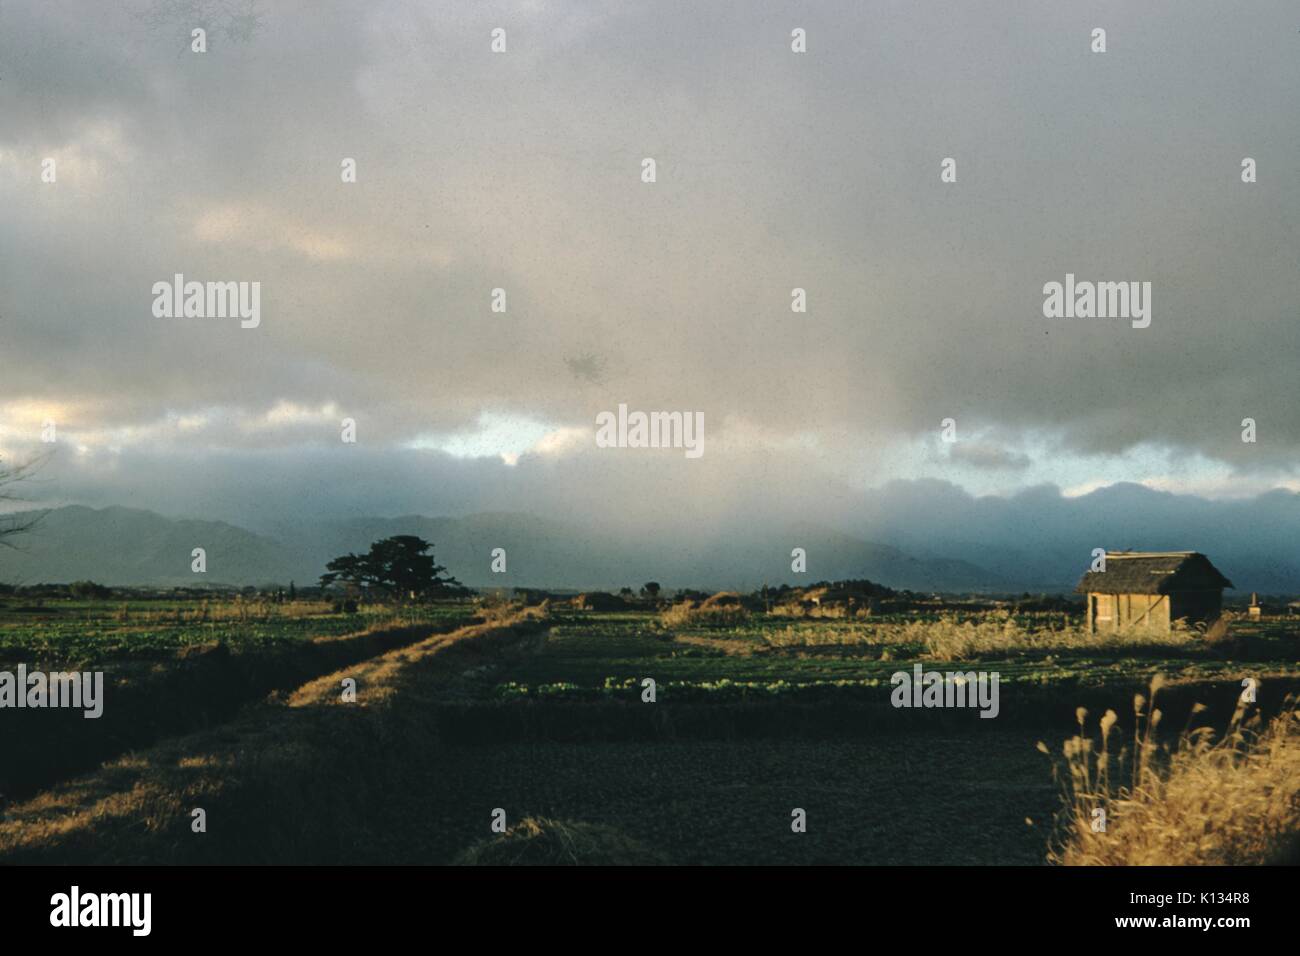 Farm field and small outbuildings next to a dirt road, lit by the setting sun, Japan, 1951. Stock Photo